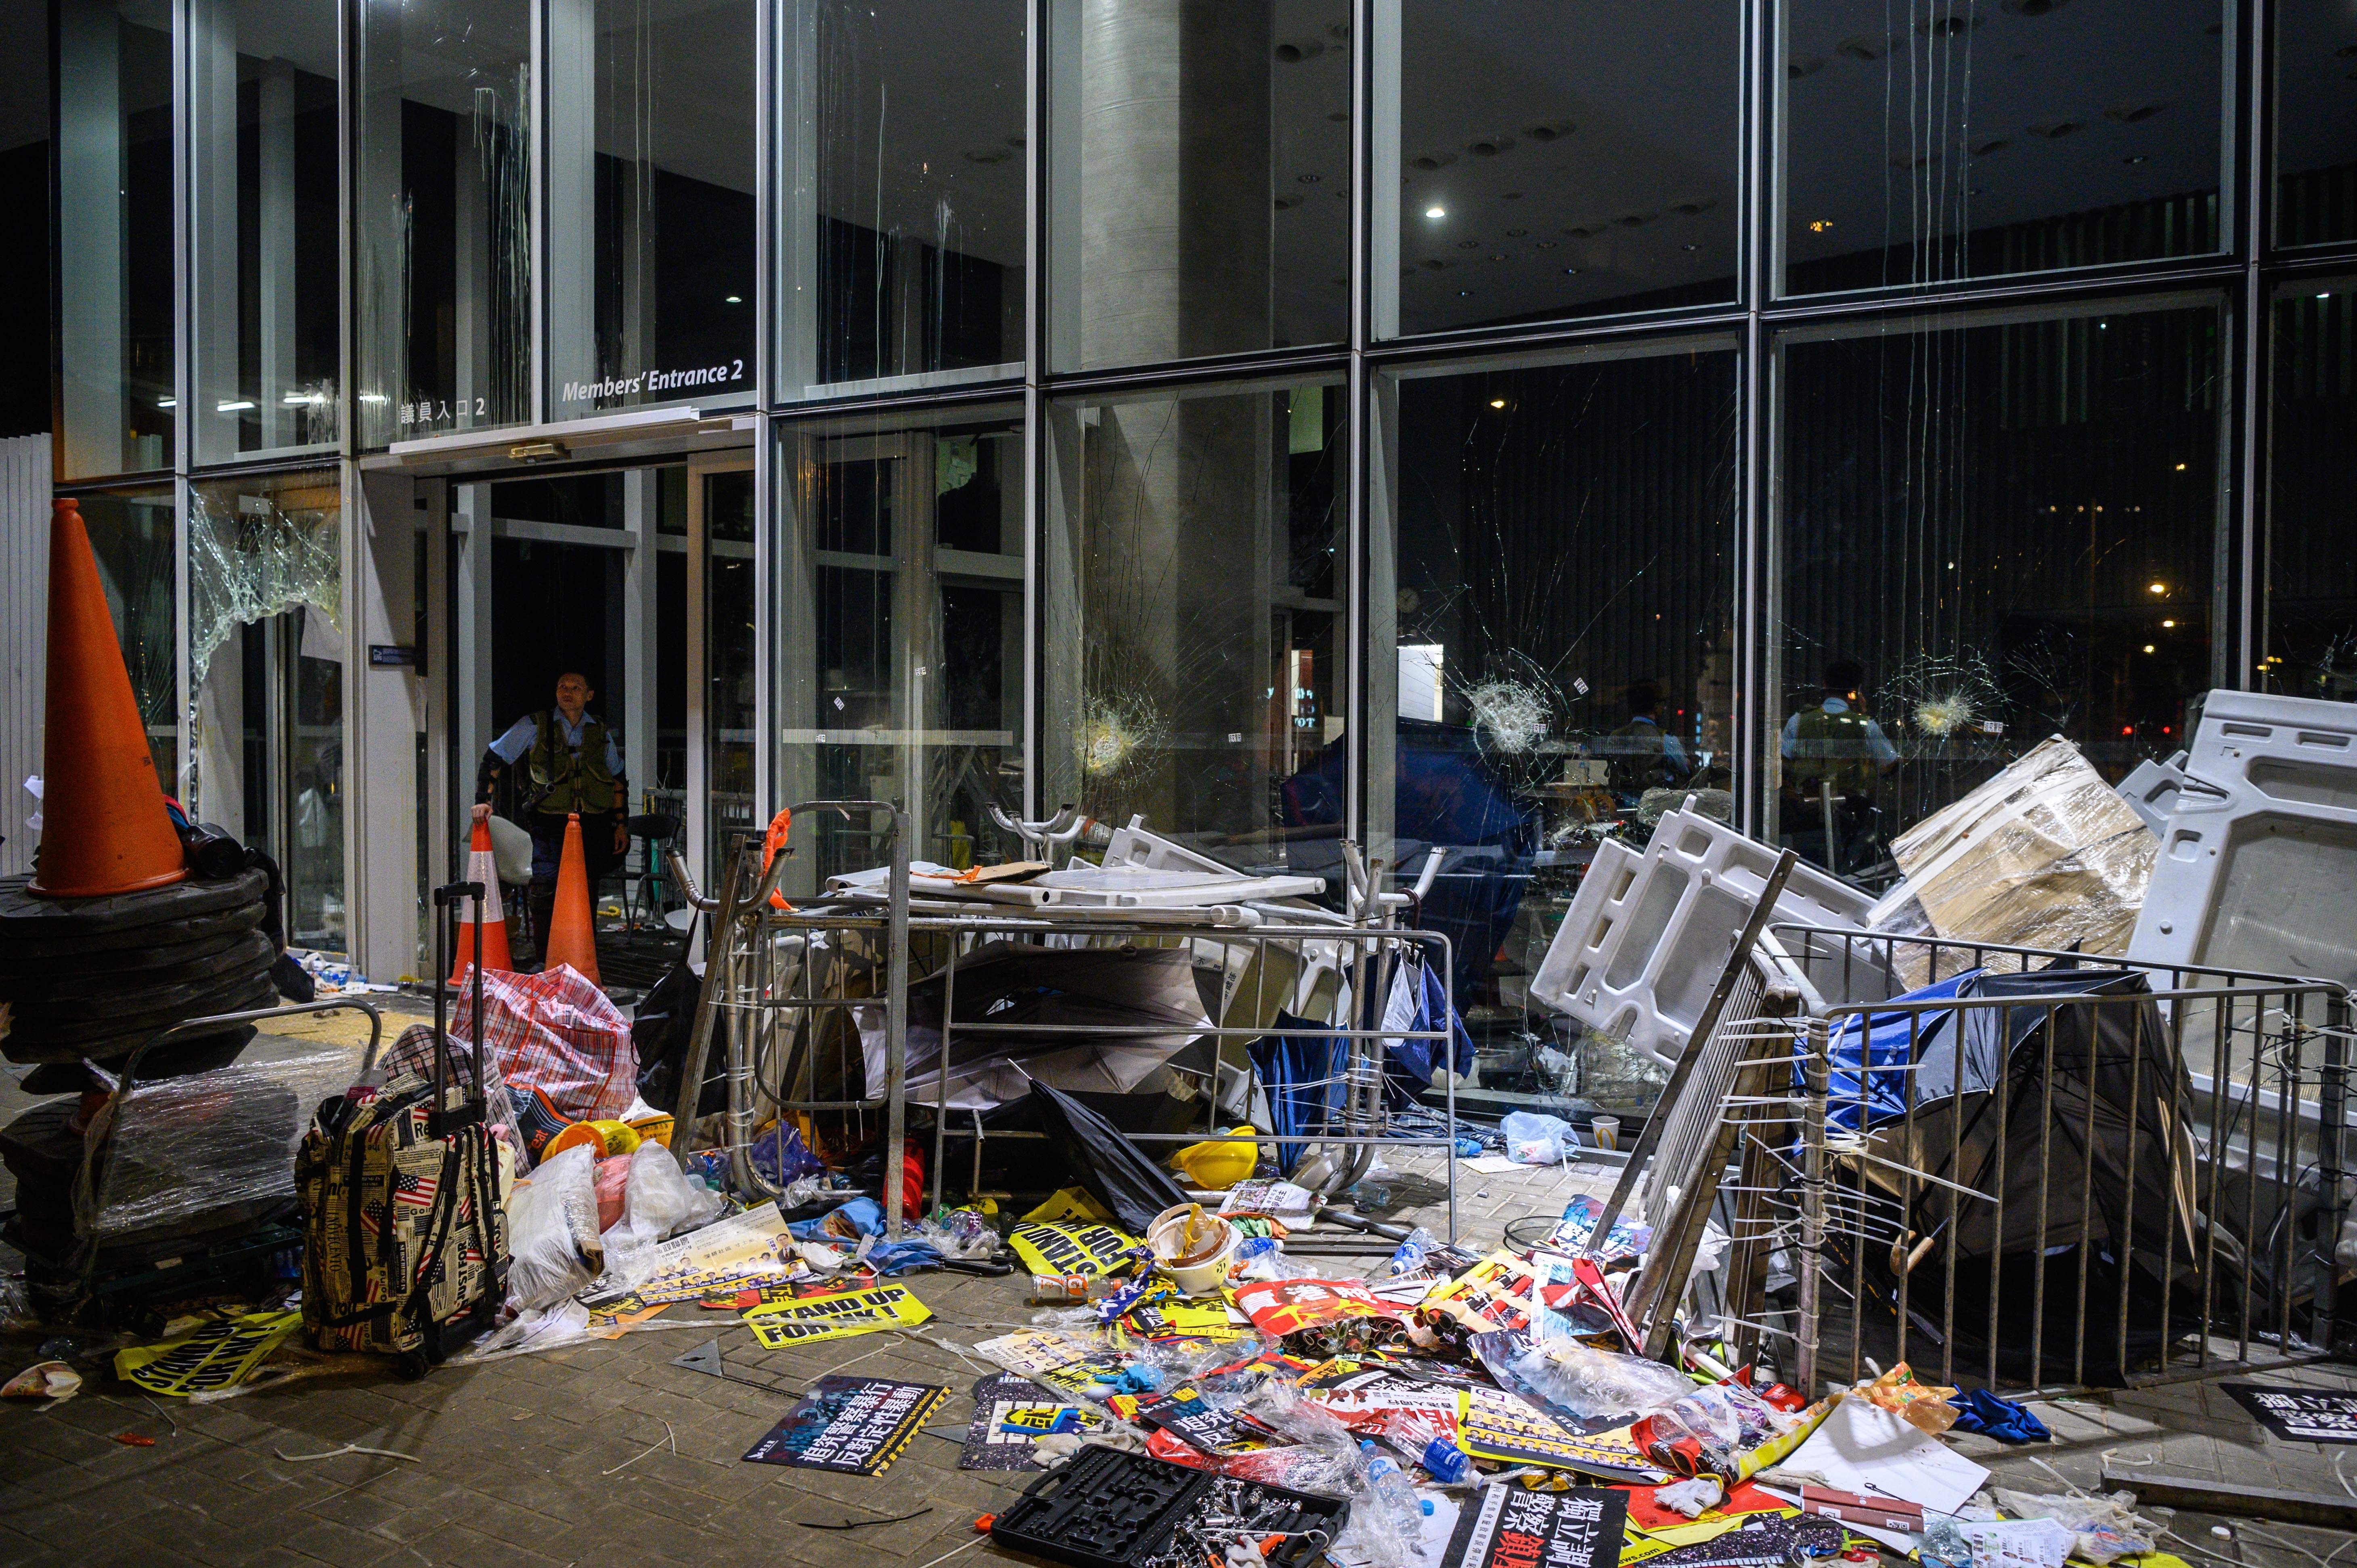 A policeman looks at the damage and debris after protesters stormed the government headquarters.